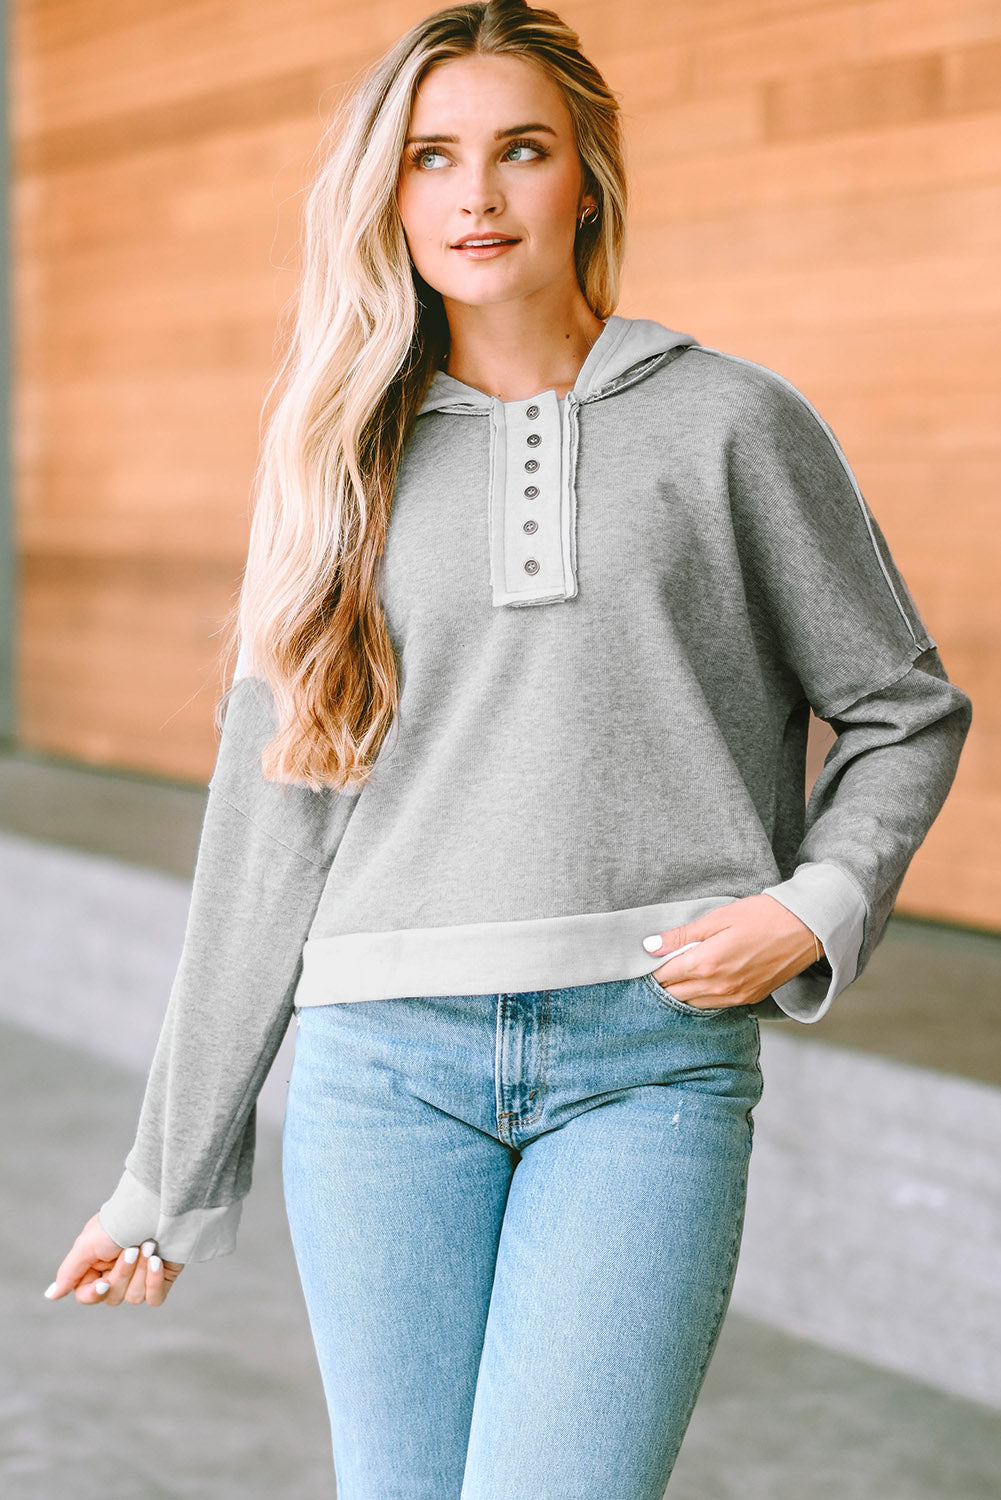 Quarter-Button Exposed Seam Dropped Shoulder Hoodie - Light Gray / S - Women’s Clothing & Accessories - Shirts & Tops